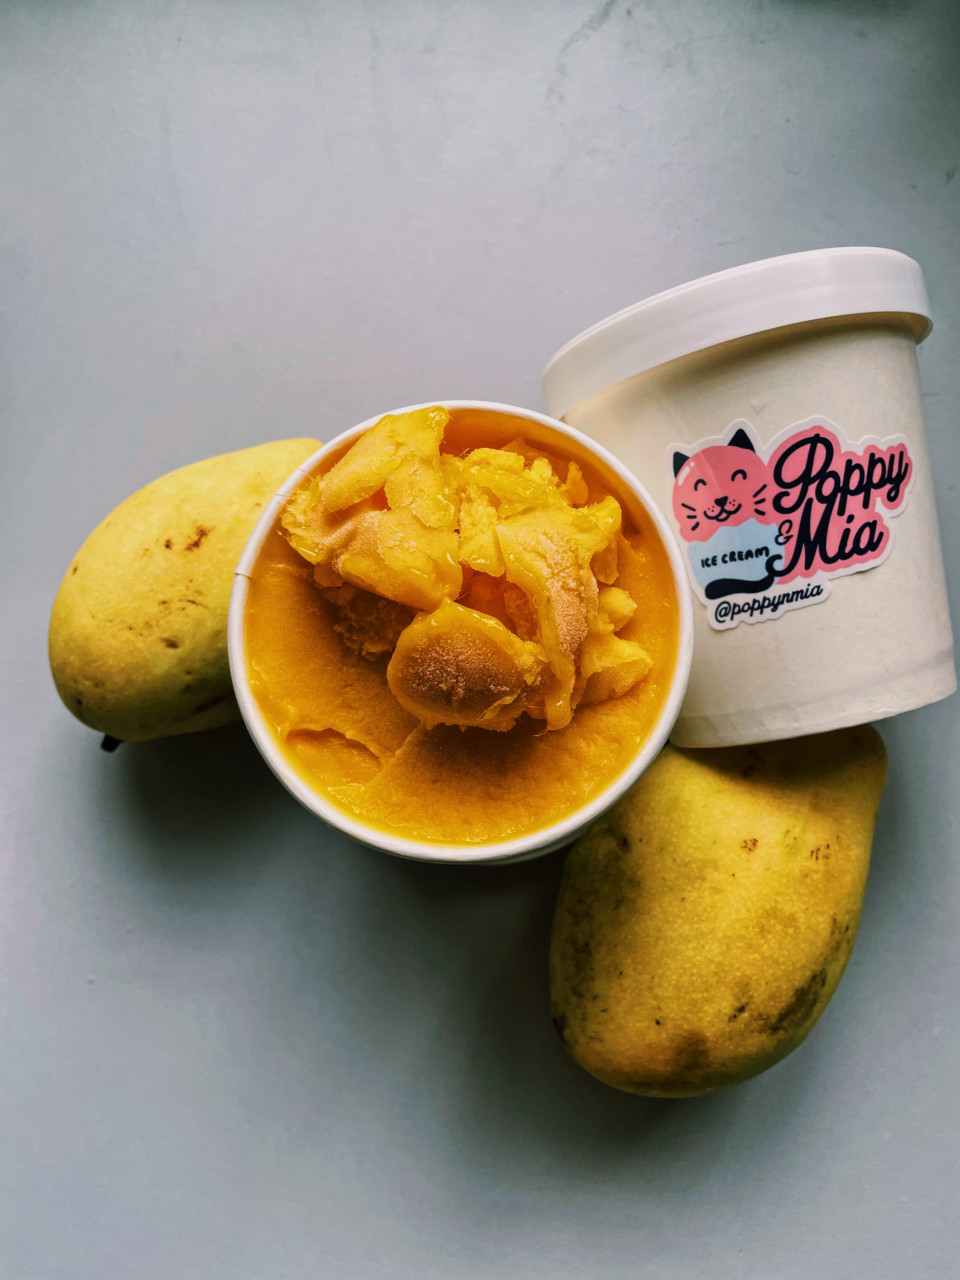 Sam’s scrumptious mango ice cream can be ordered online. - Pic courtesy of Samanta Soon